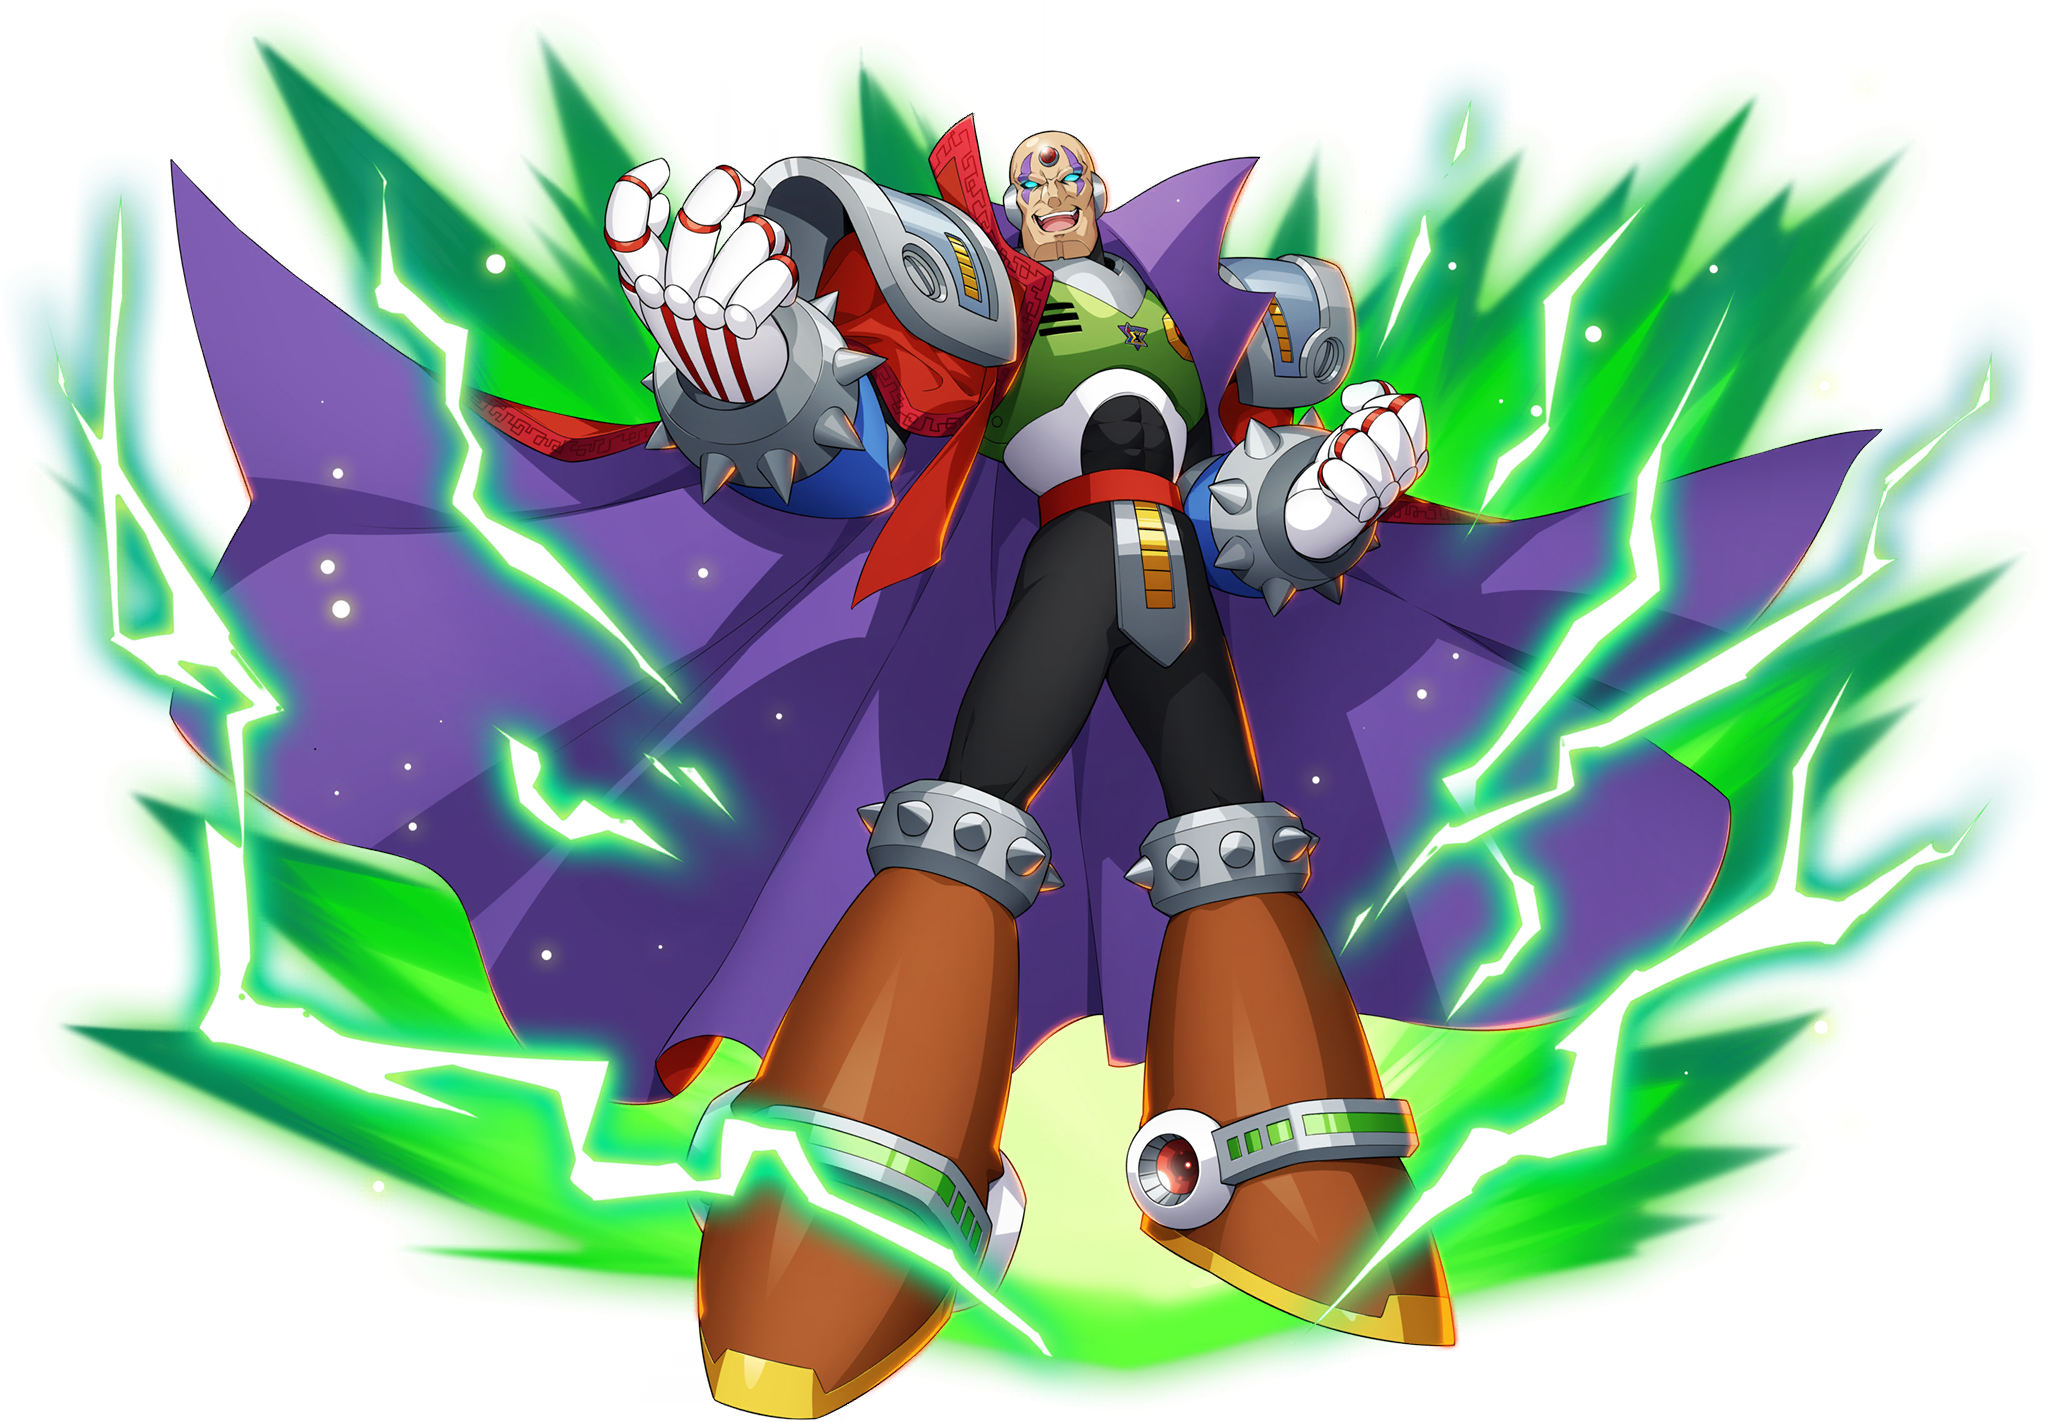 Captain Byte! ⭐ on X: Another leak was posted, and here are a